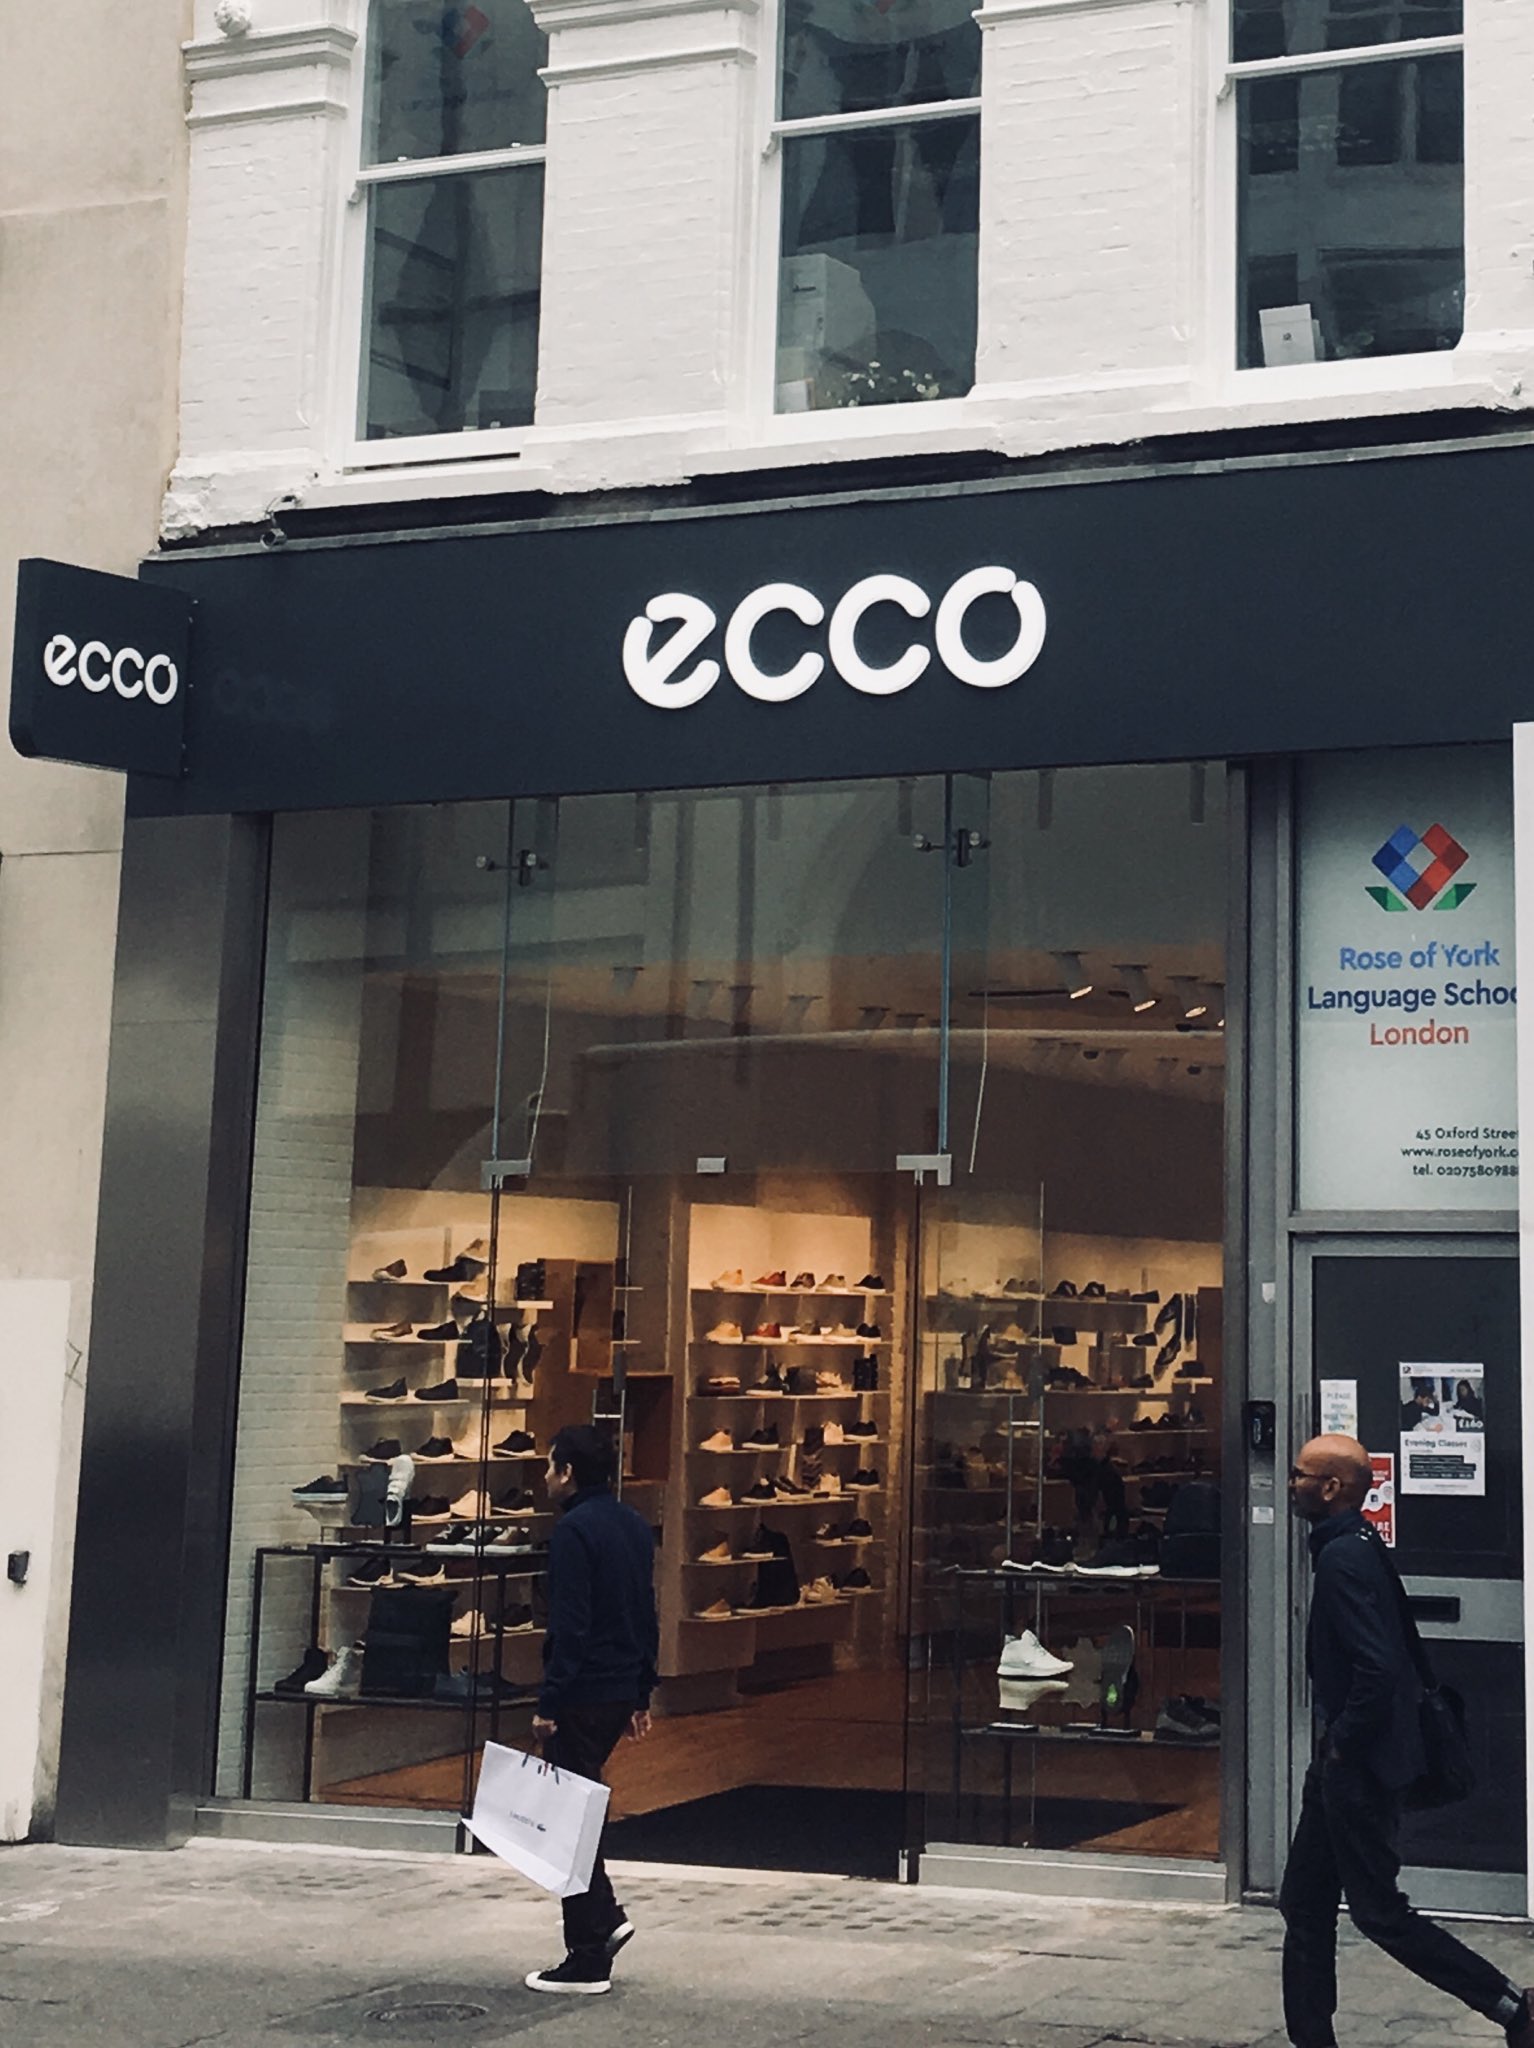 bitter Cafe skrig David Carlsson on Twitter: "The latest ⁦@ECCOshoes⁩ just opened on Oxford  Street, advised by ⁦@Colliers_London⁩. Further opportunities throughout the  UK are being identified. #Ecco #Shoes #London #OxfordStreet  https://t.co/hM6m6cpEhU" / Twitter